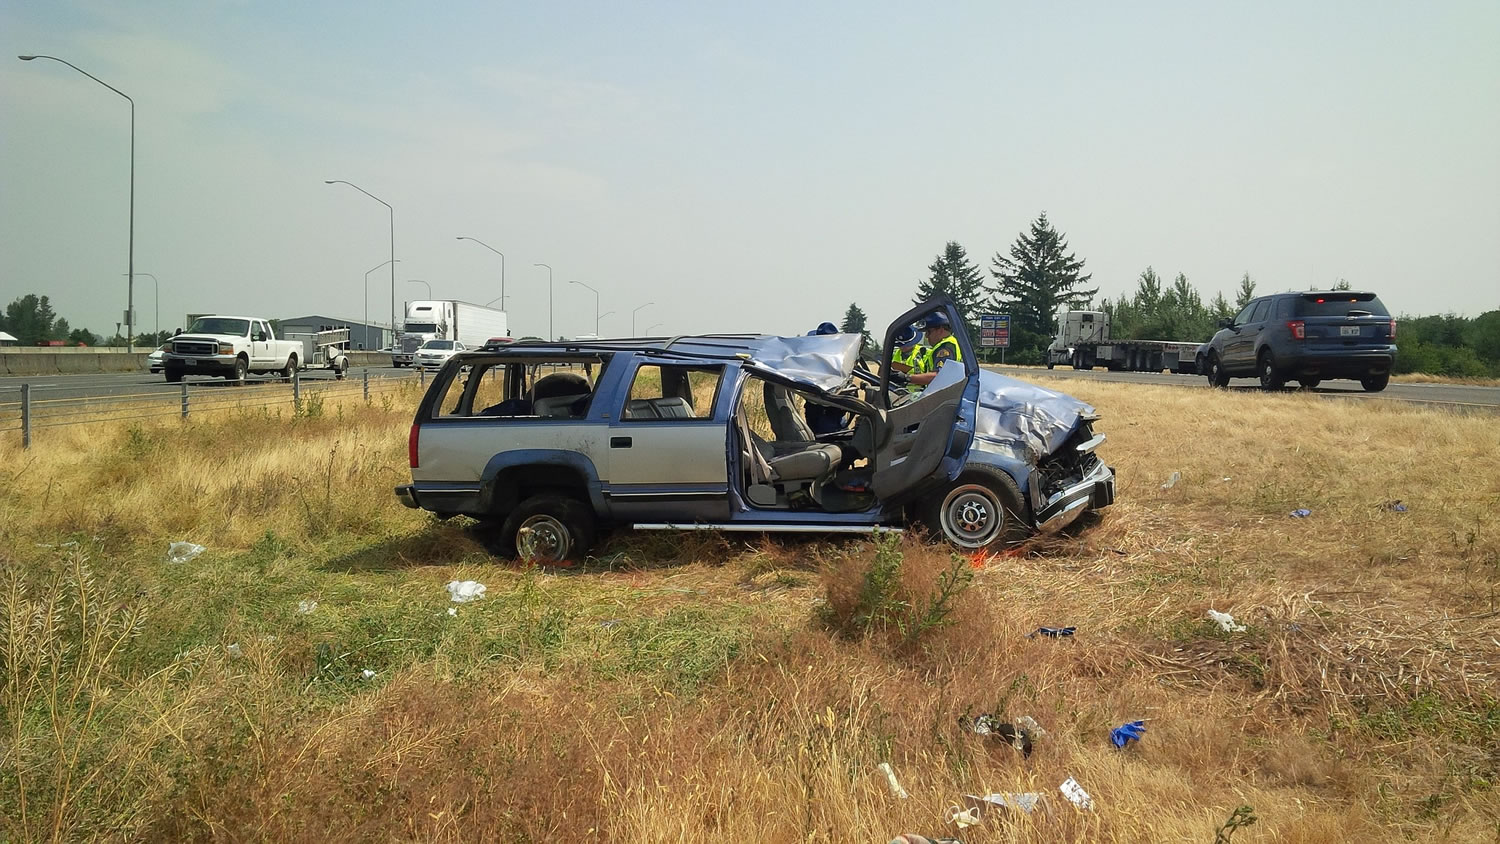 Washington State Patrol troopers investigate a single-car crash in the median of Interstate 5 near the Ridgefield Port of Entry.